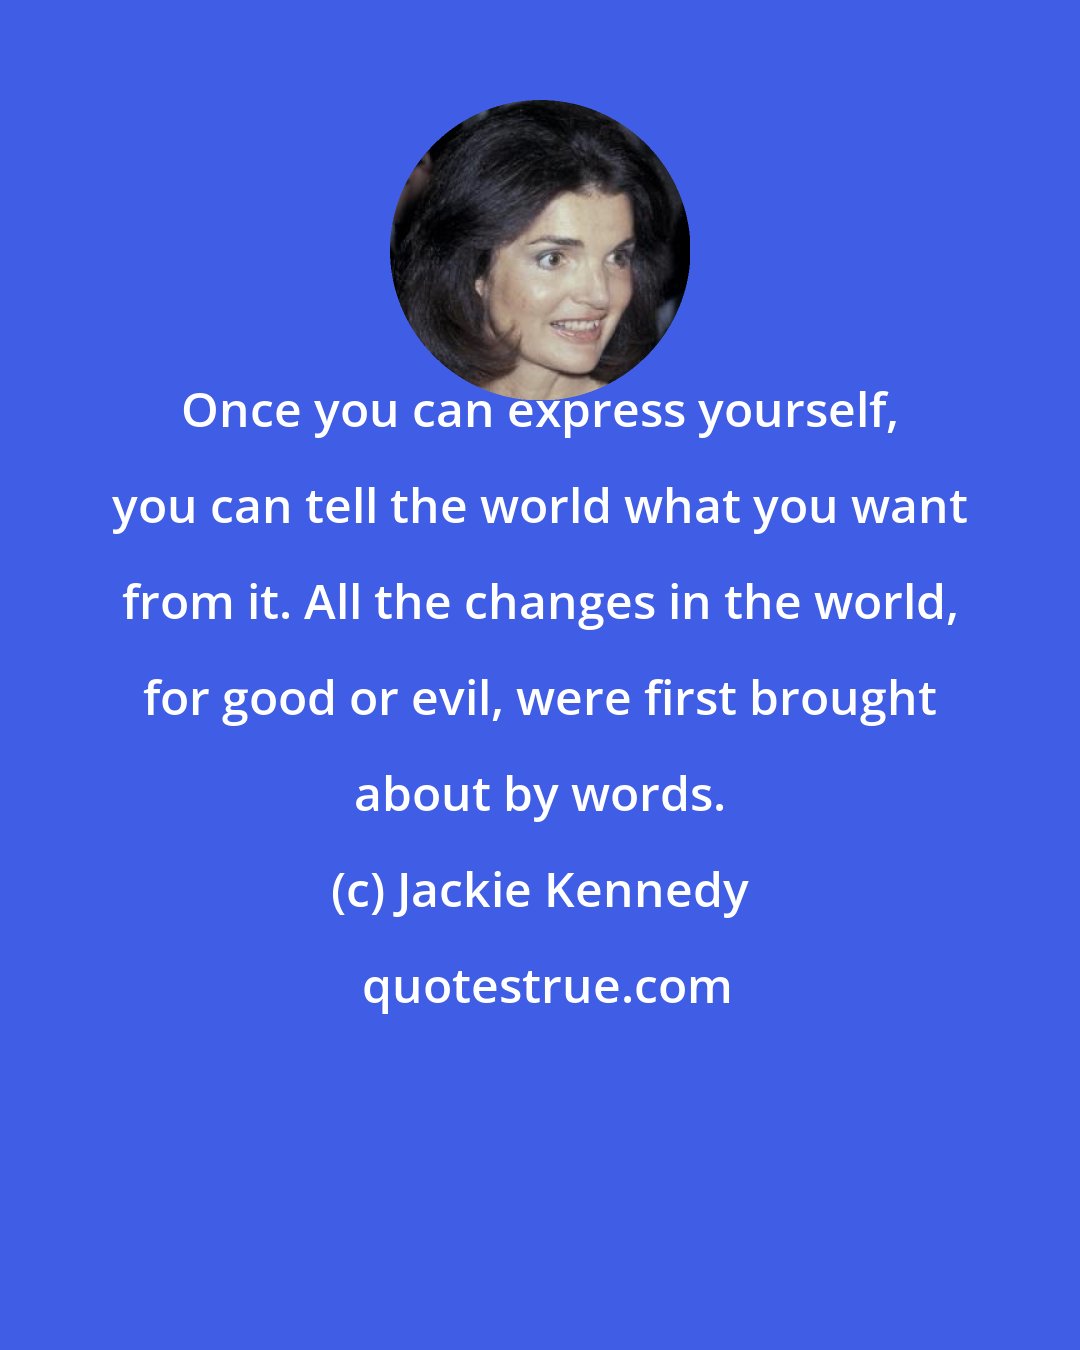 Jackie Kennedy: Once you can express yourself, you can tell the world what you want from it. All the changes in the world, for good or evil, were first brought about by words.